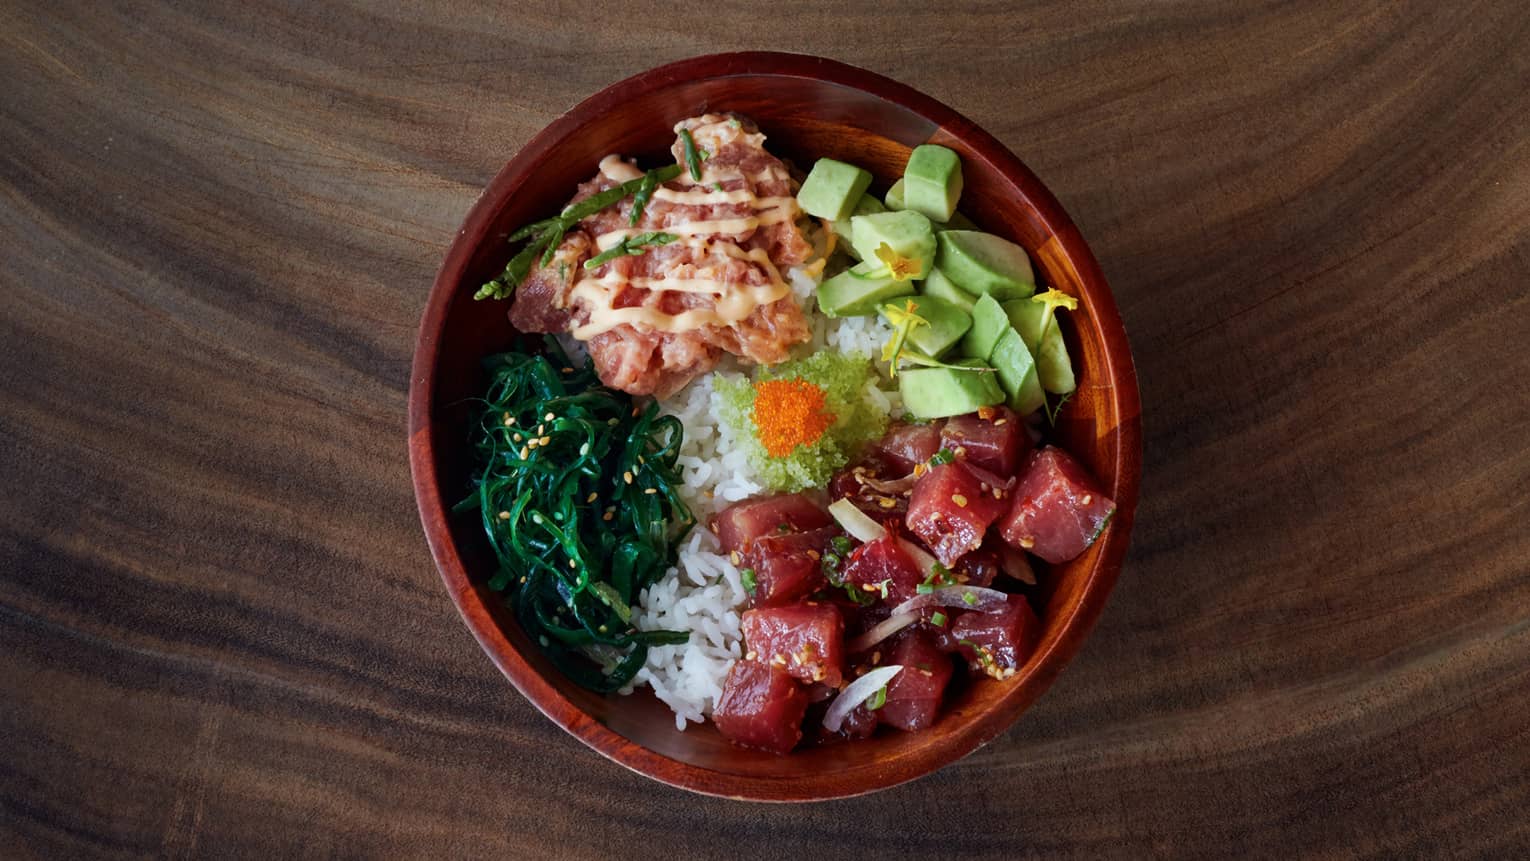 A bowl of poke, the Maui delicacy, stacked with raw fish, avocado, wasabi and greens, all perched on top of a bed of white rice